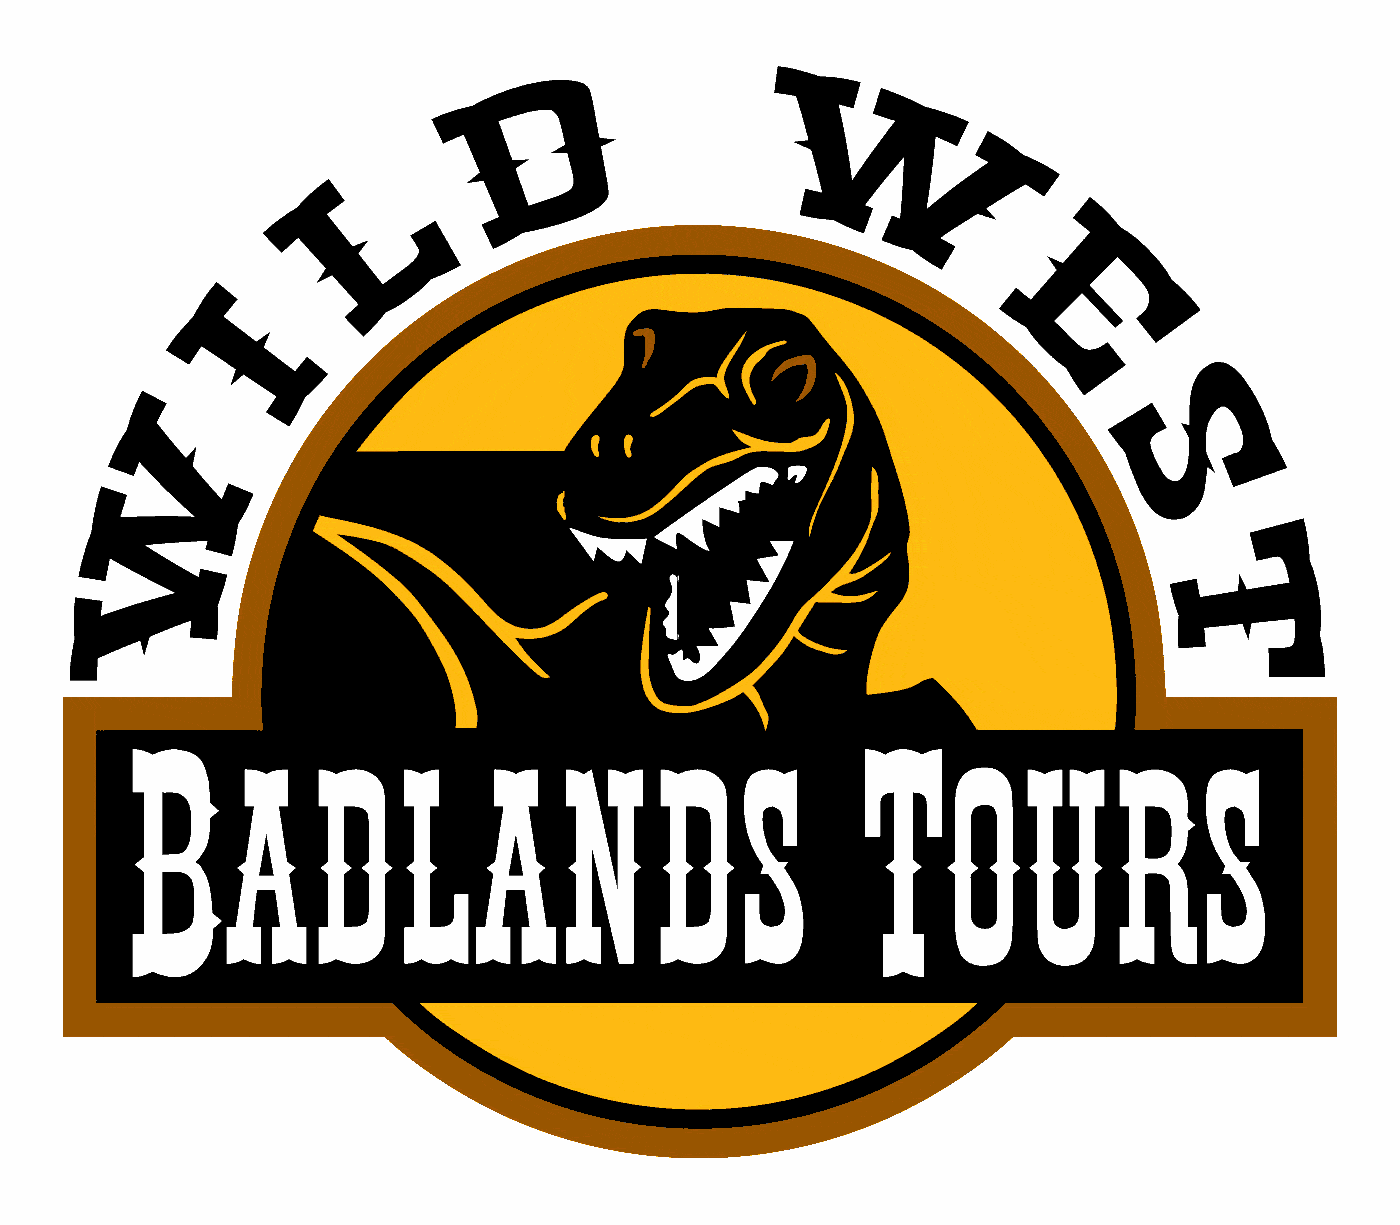 Sights To See In Canada, Wild West Badlands Tours